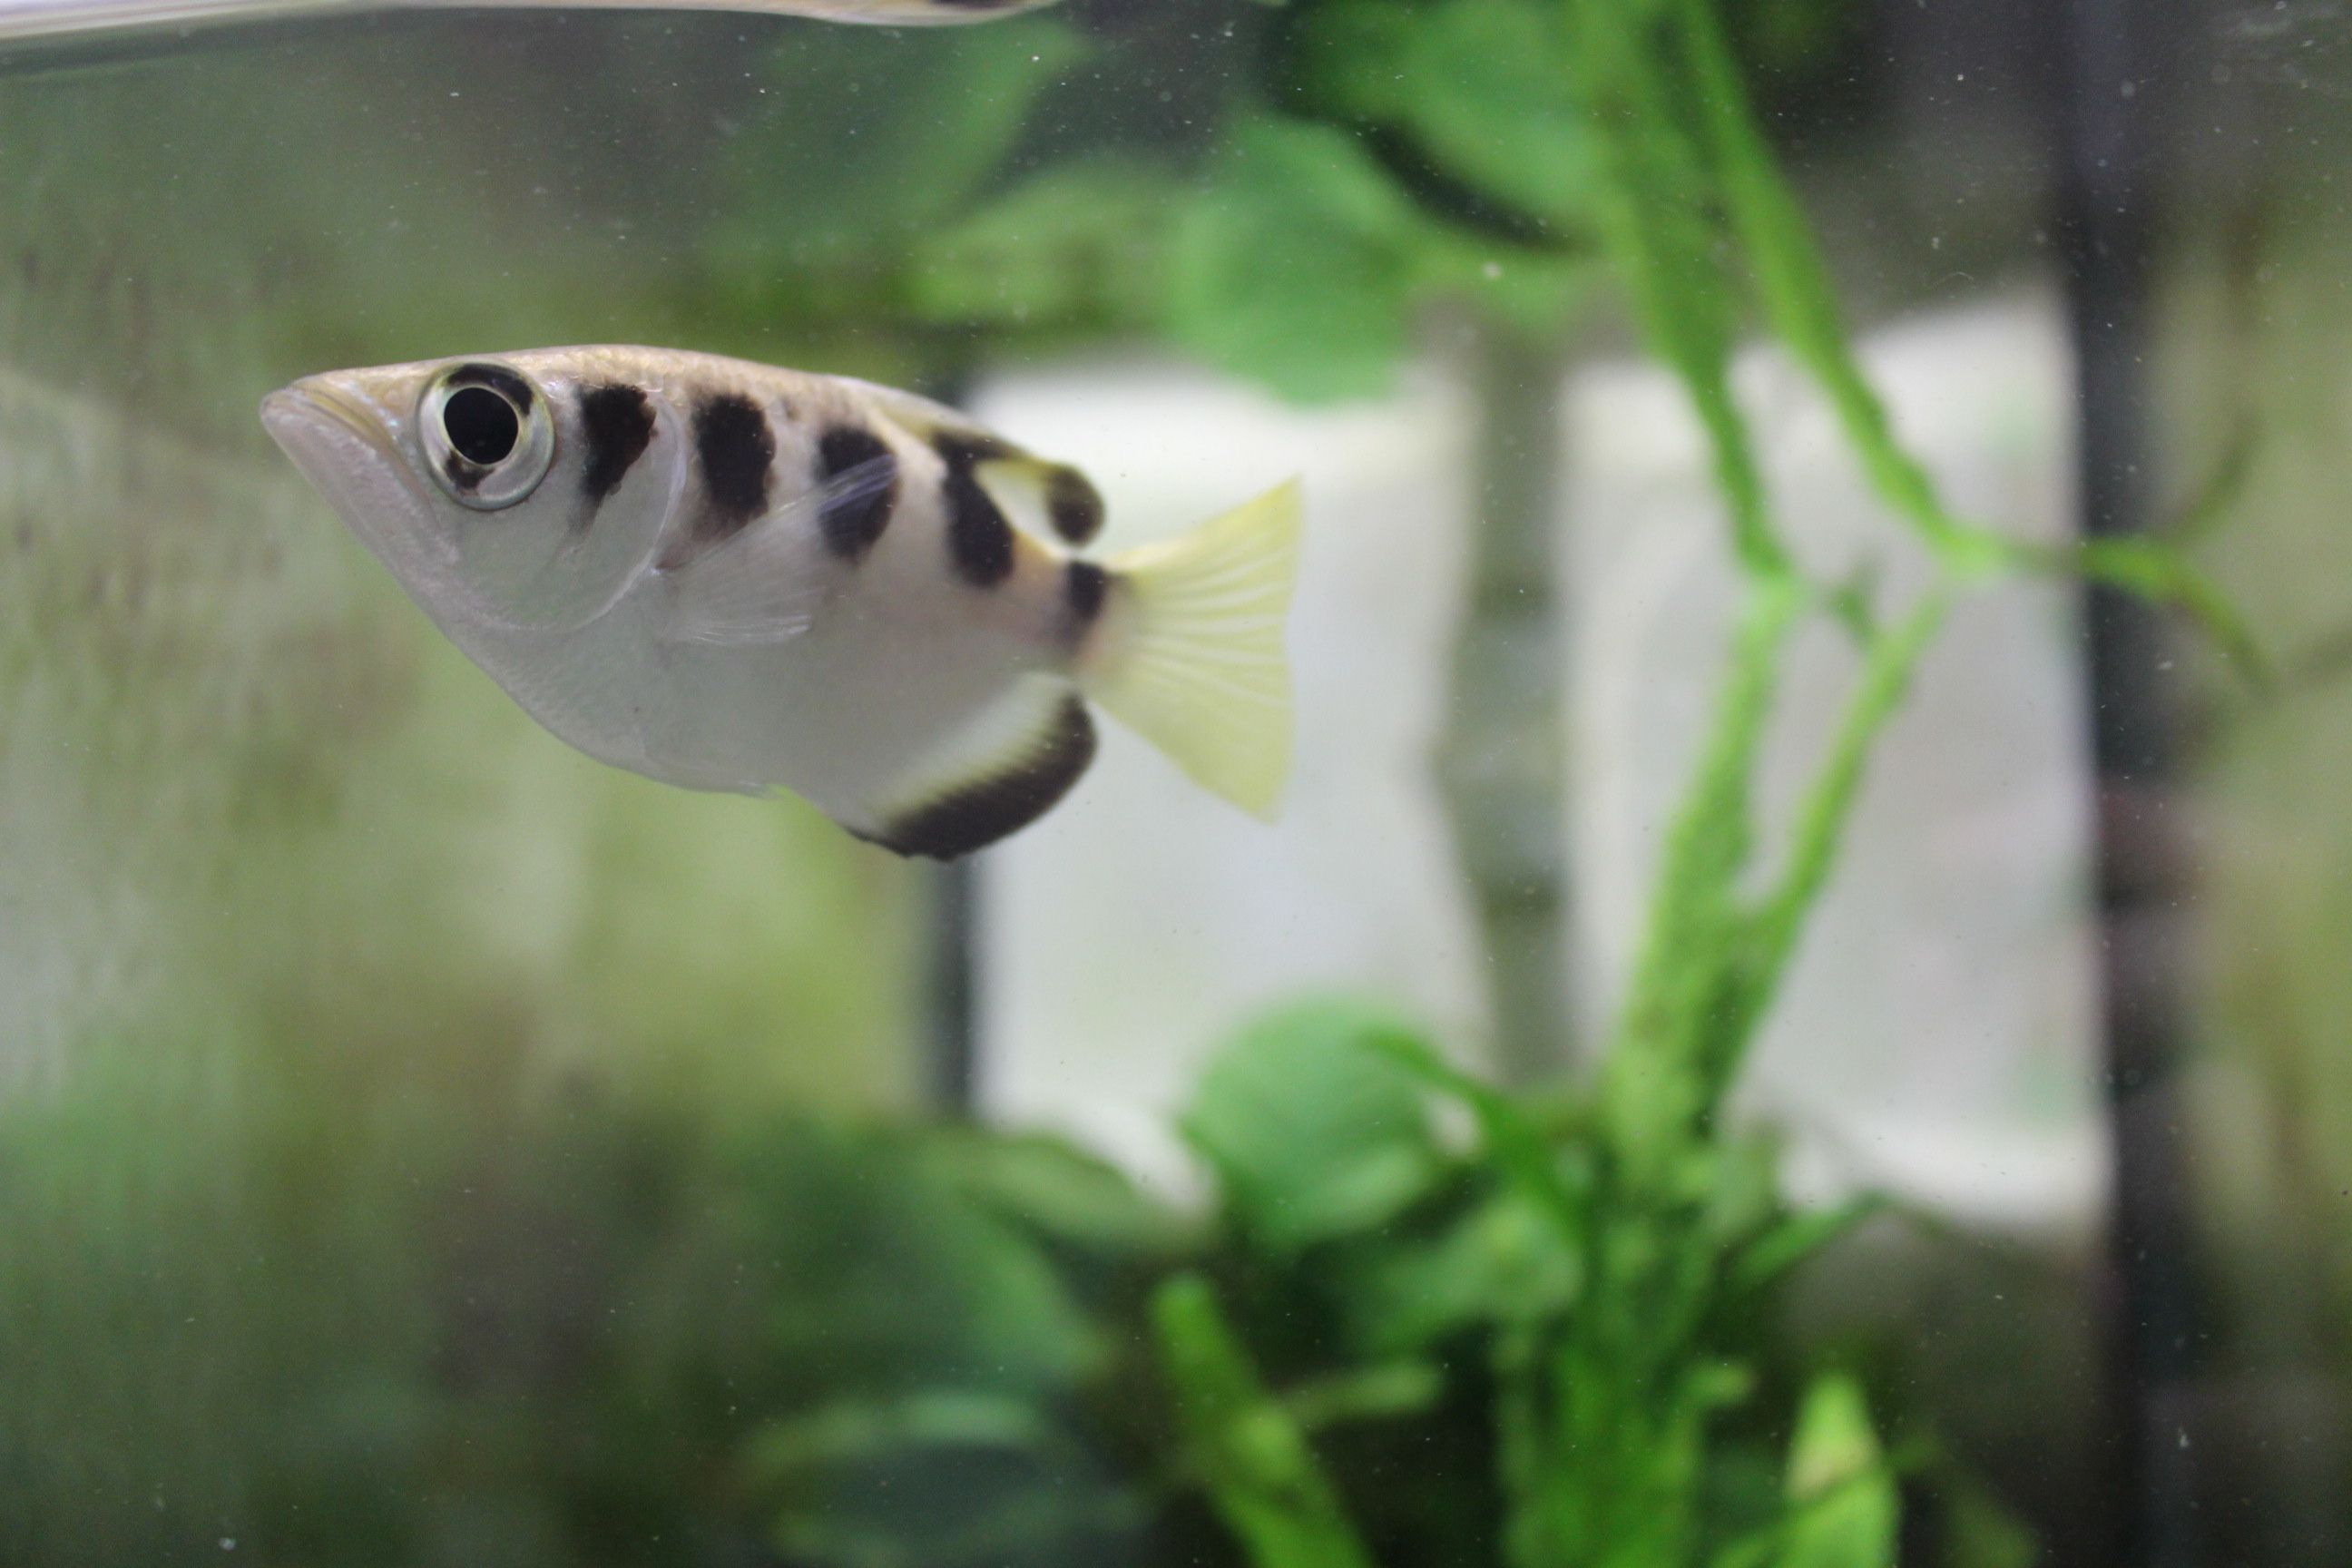 Study shows this fish can recognize human faces